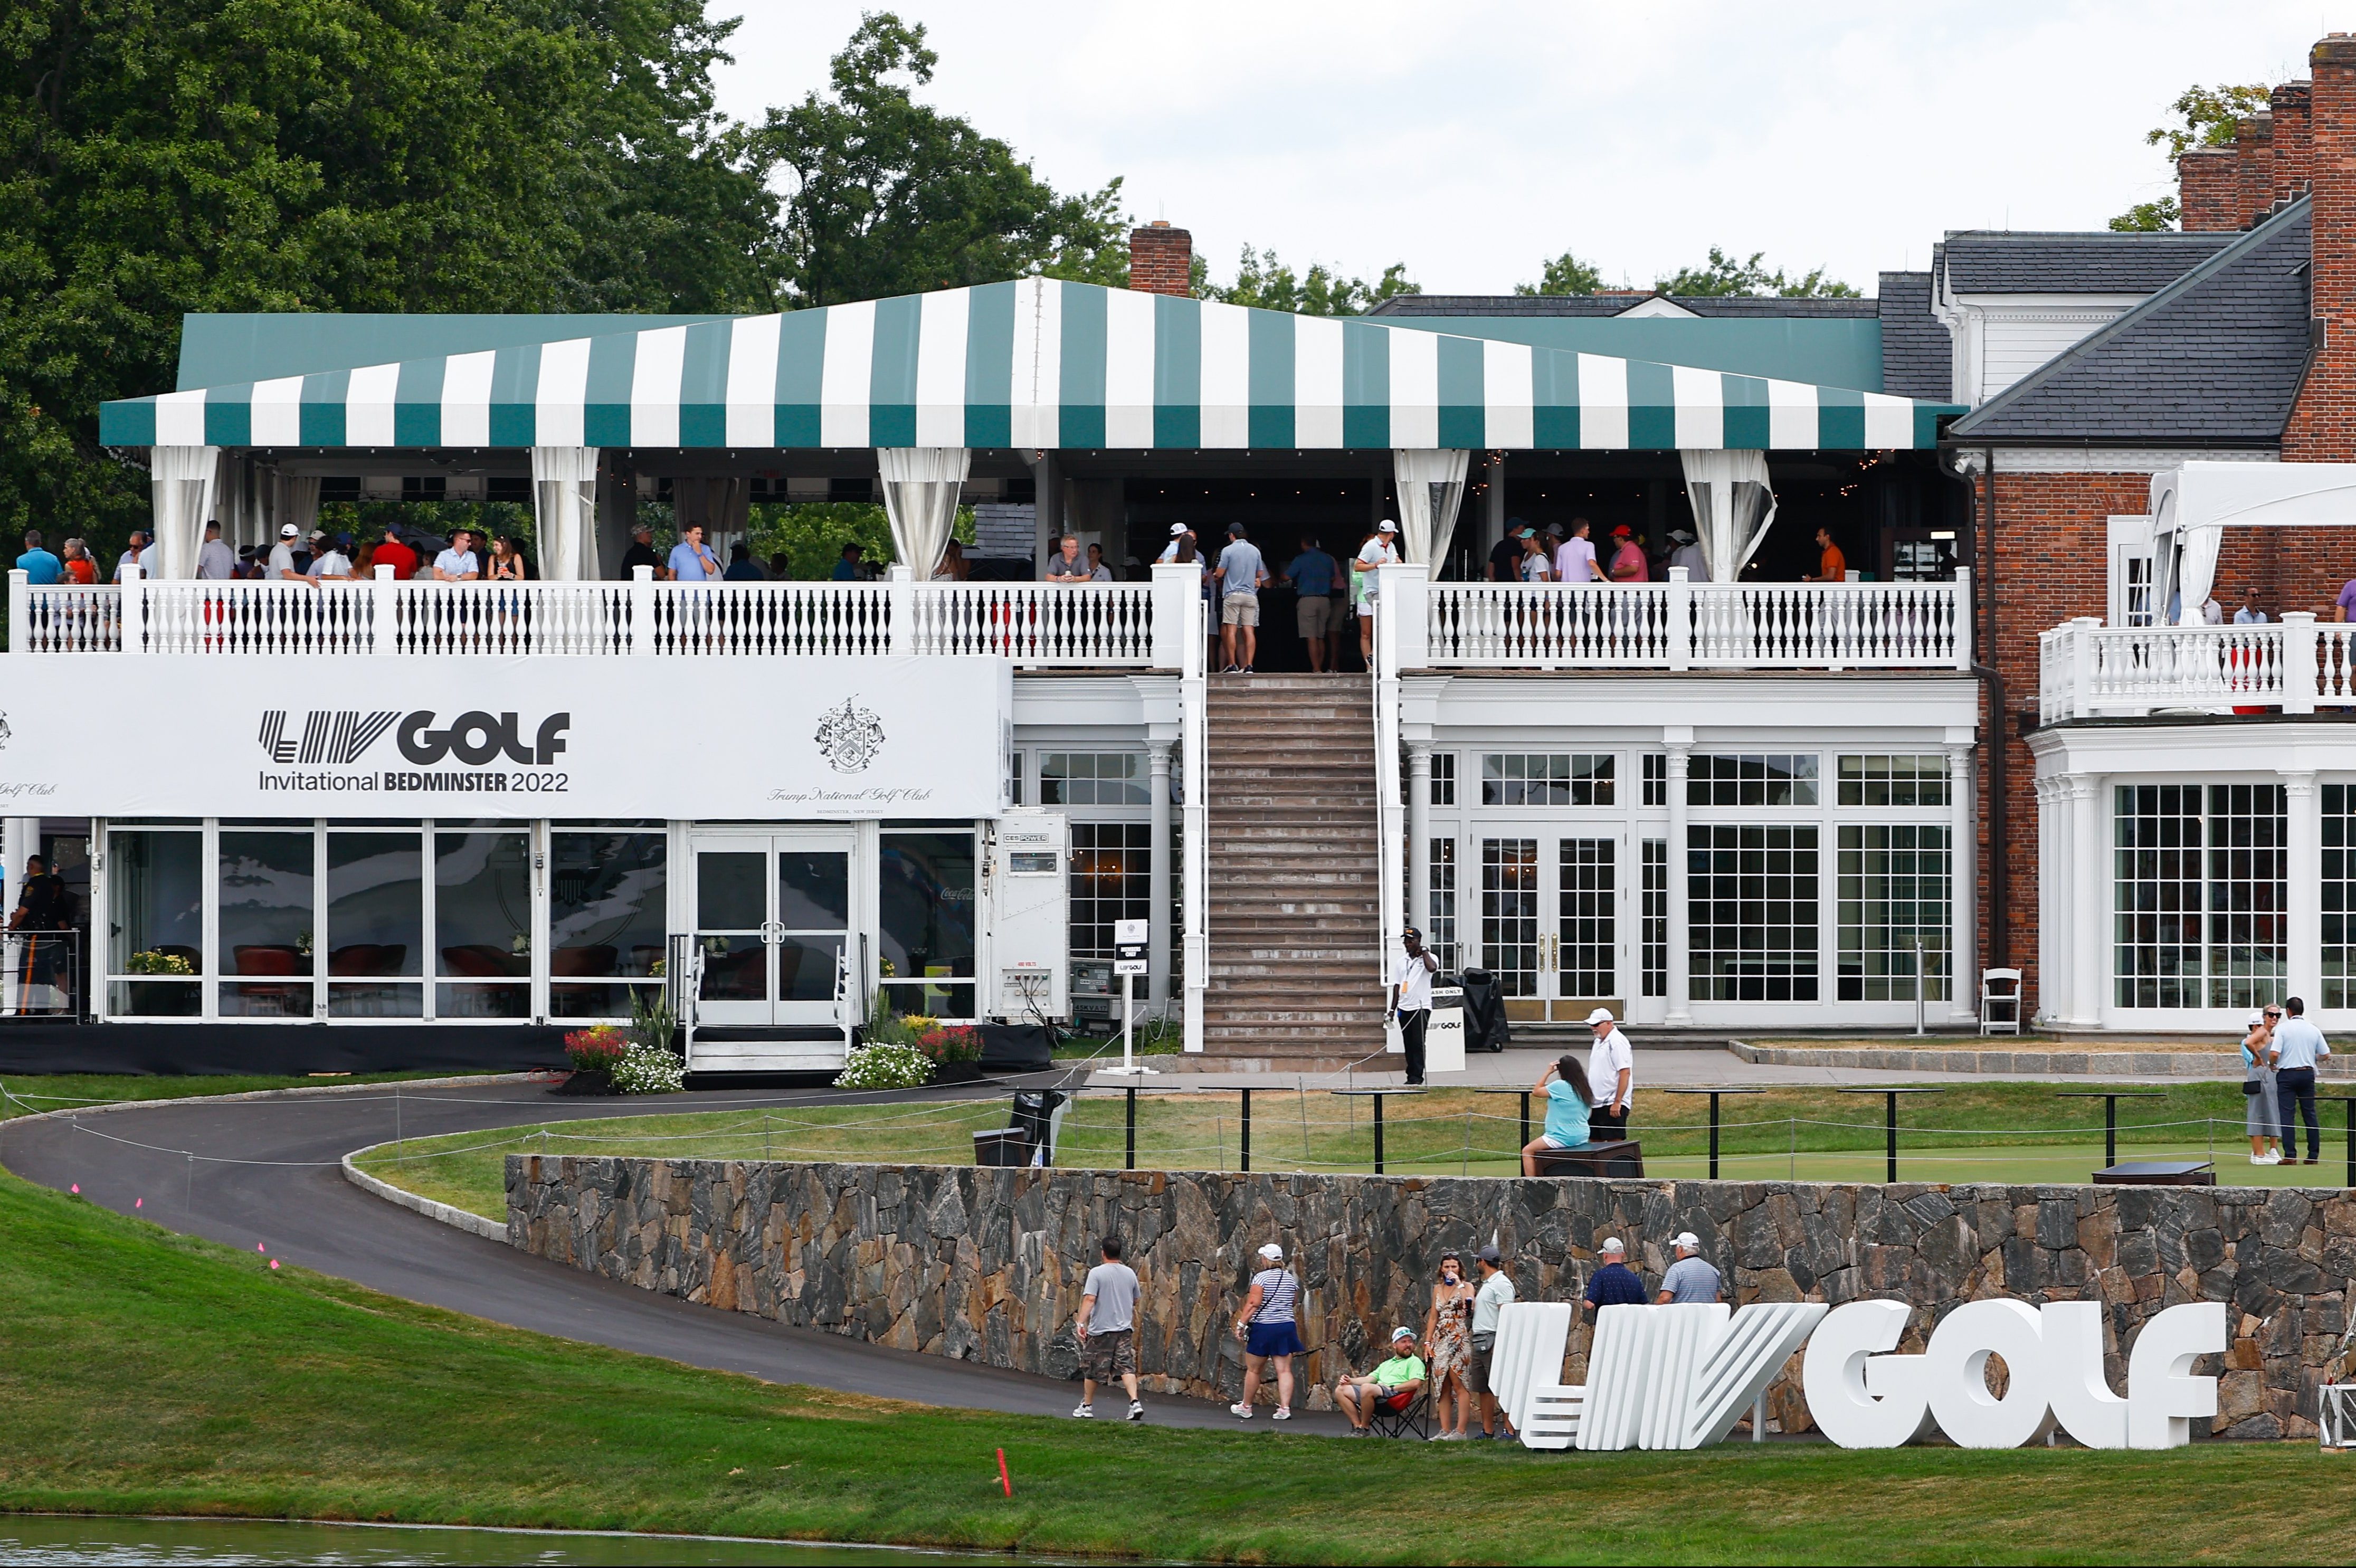 A decked-out clubhouse at the LIV Golf Invitational Series Bedminster